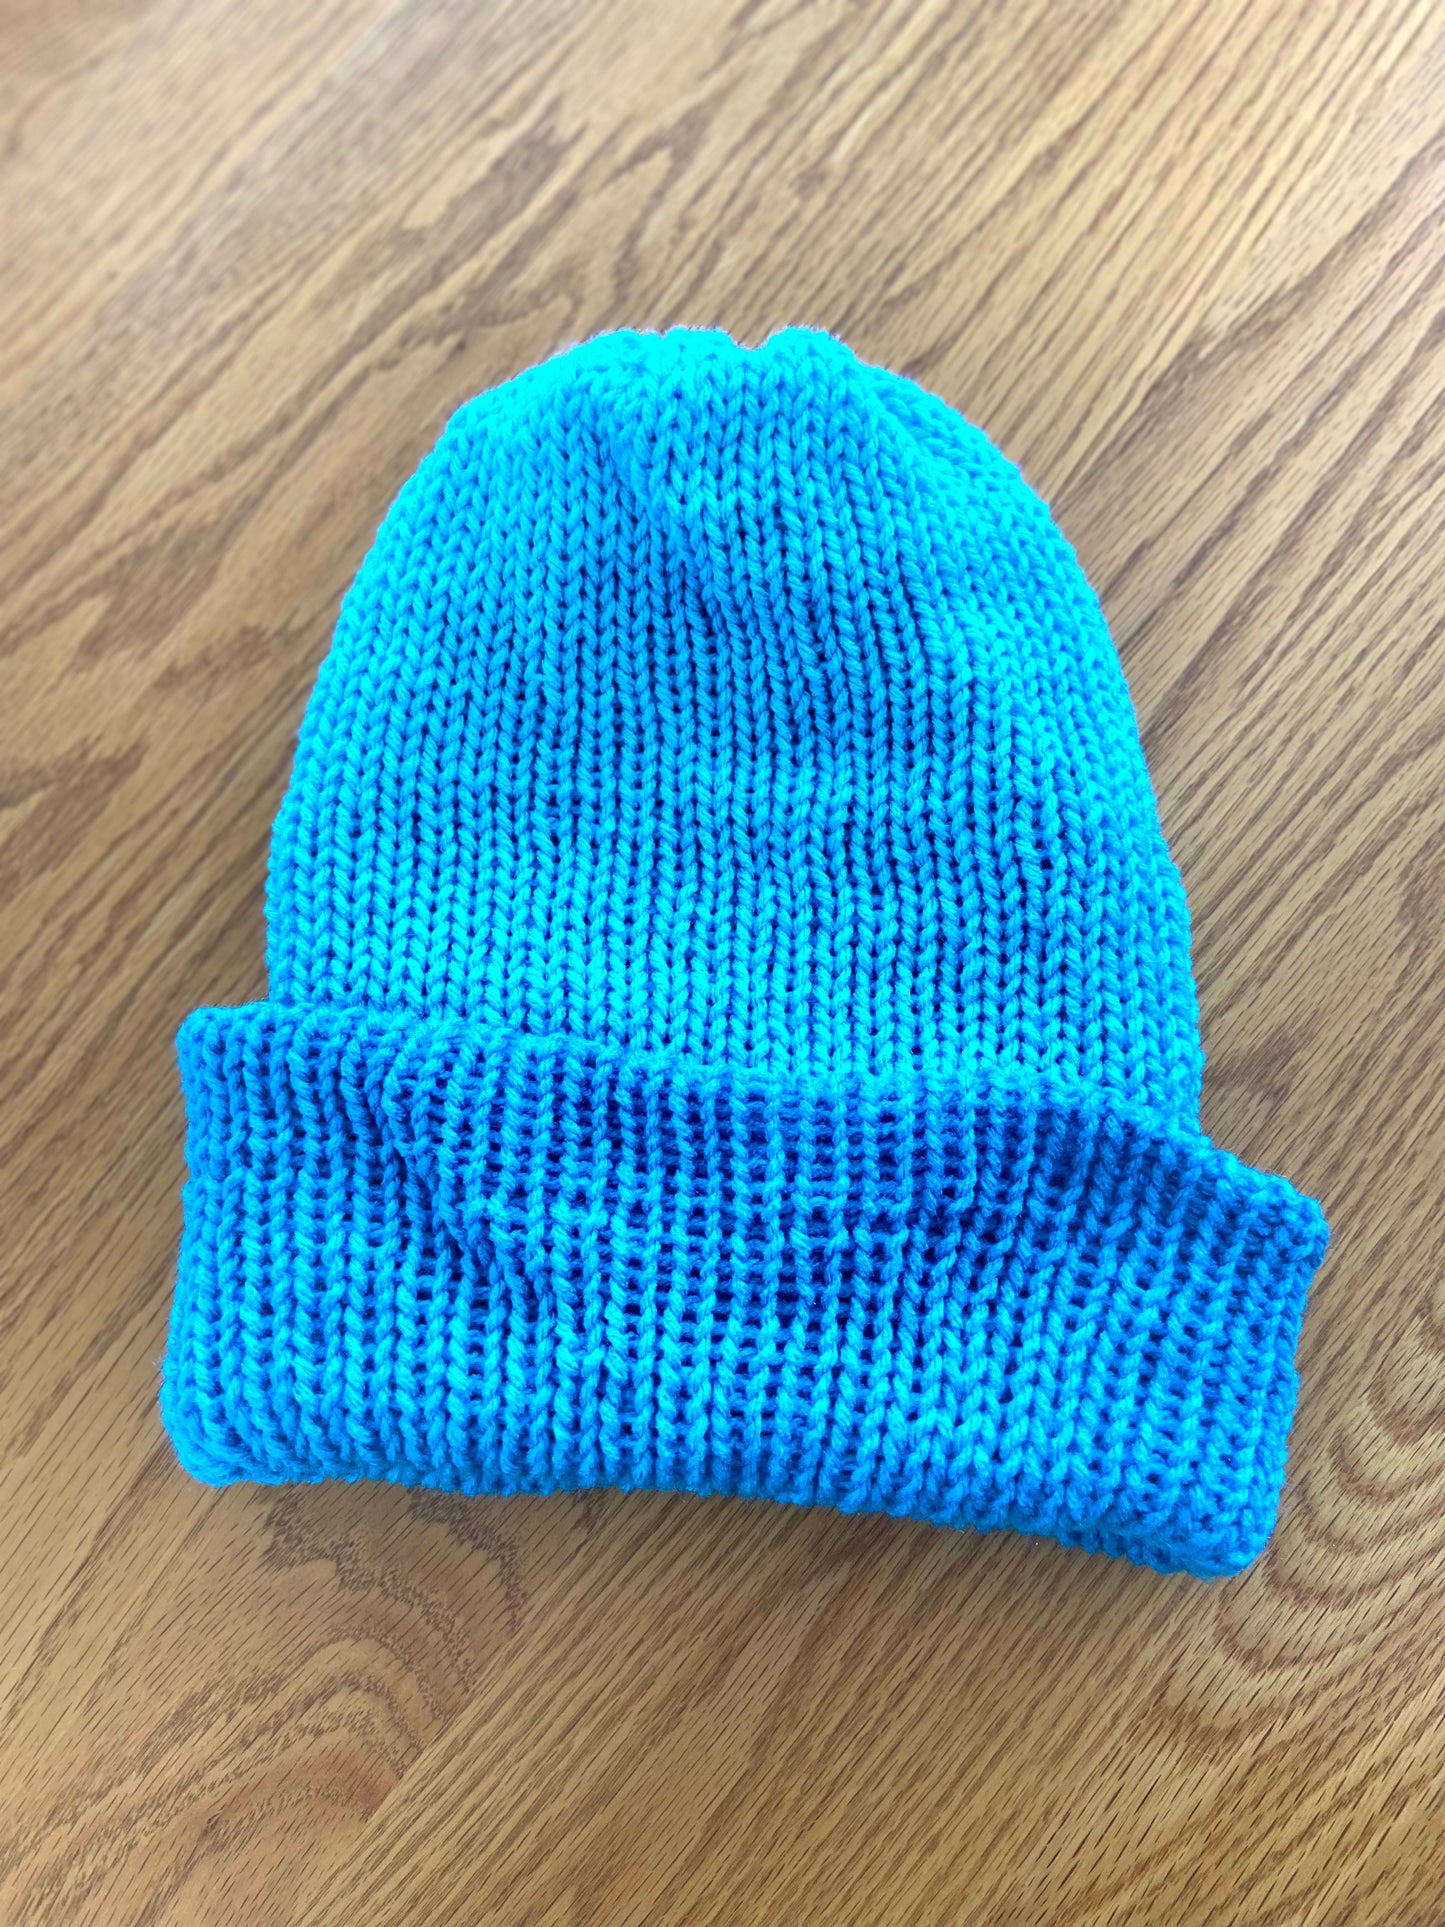 A Simple Chore Hat